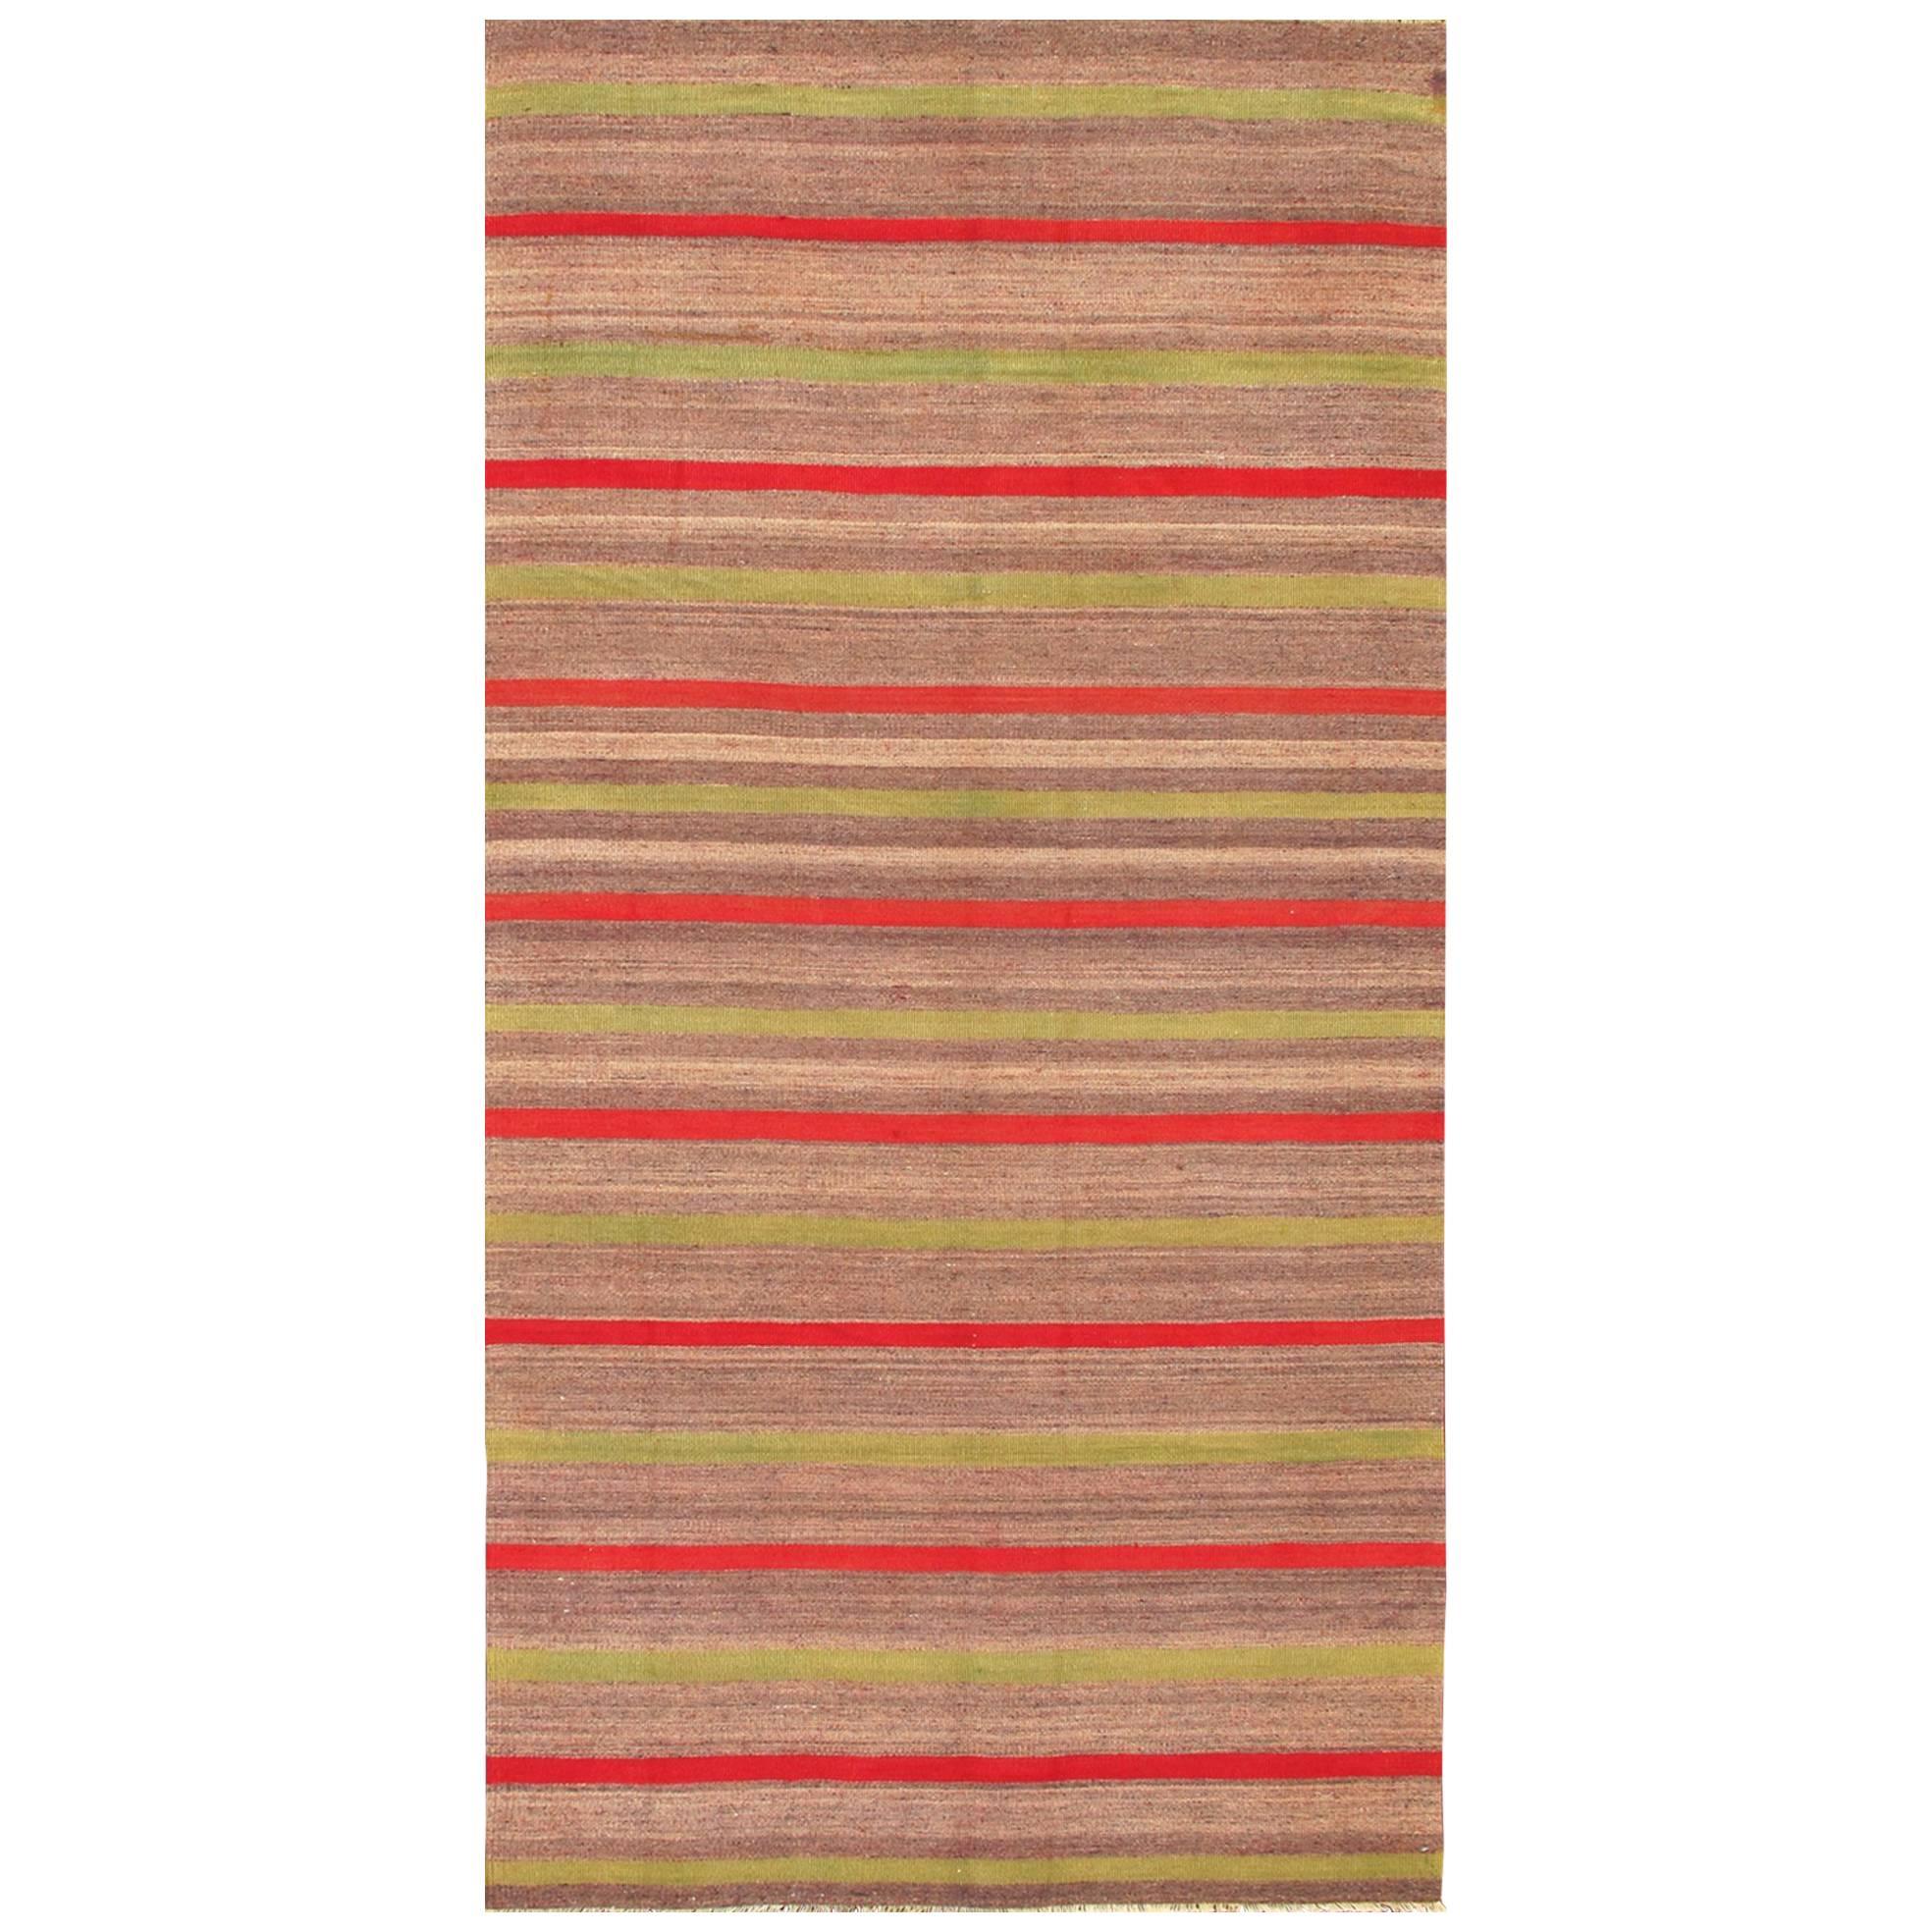 Vintage Turkish Kilim Carpet with Light Green and Red Stripes